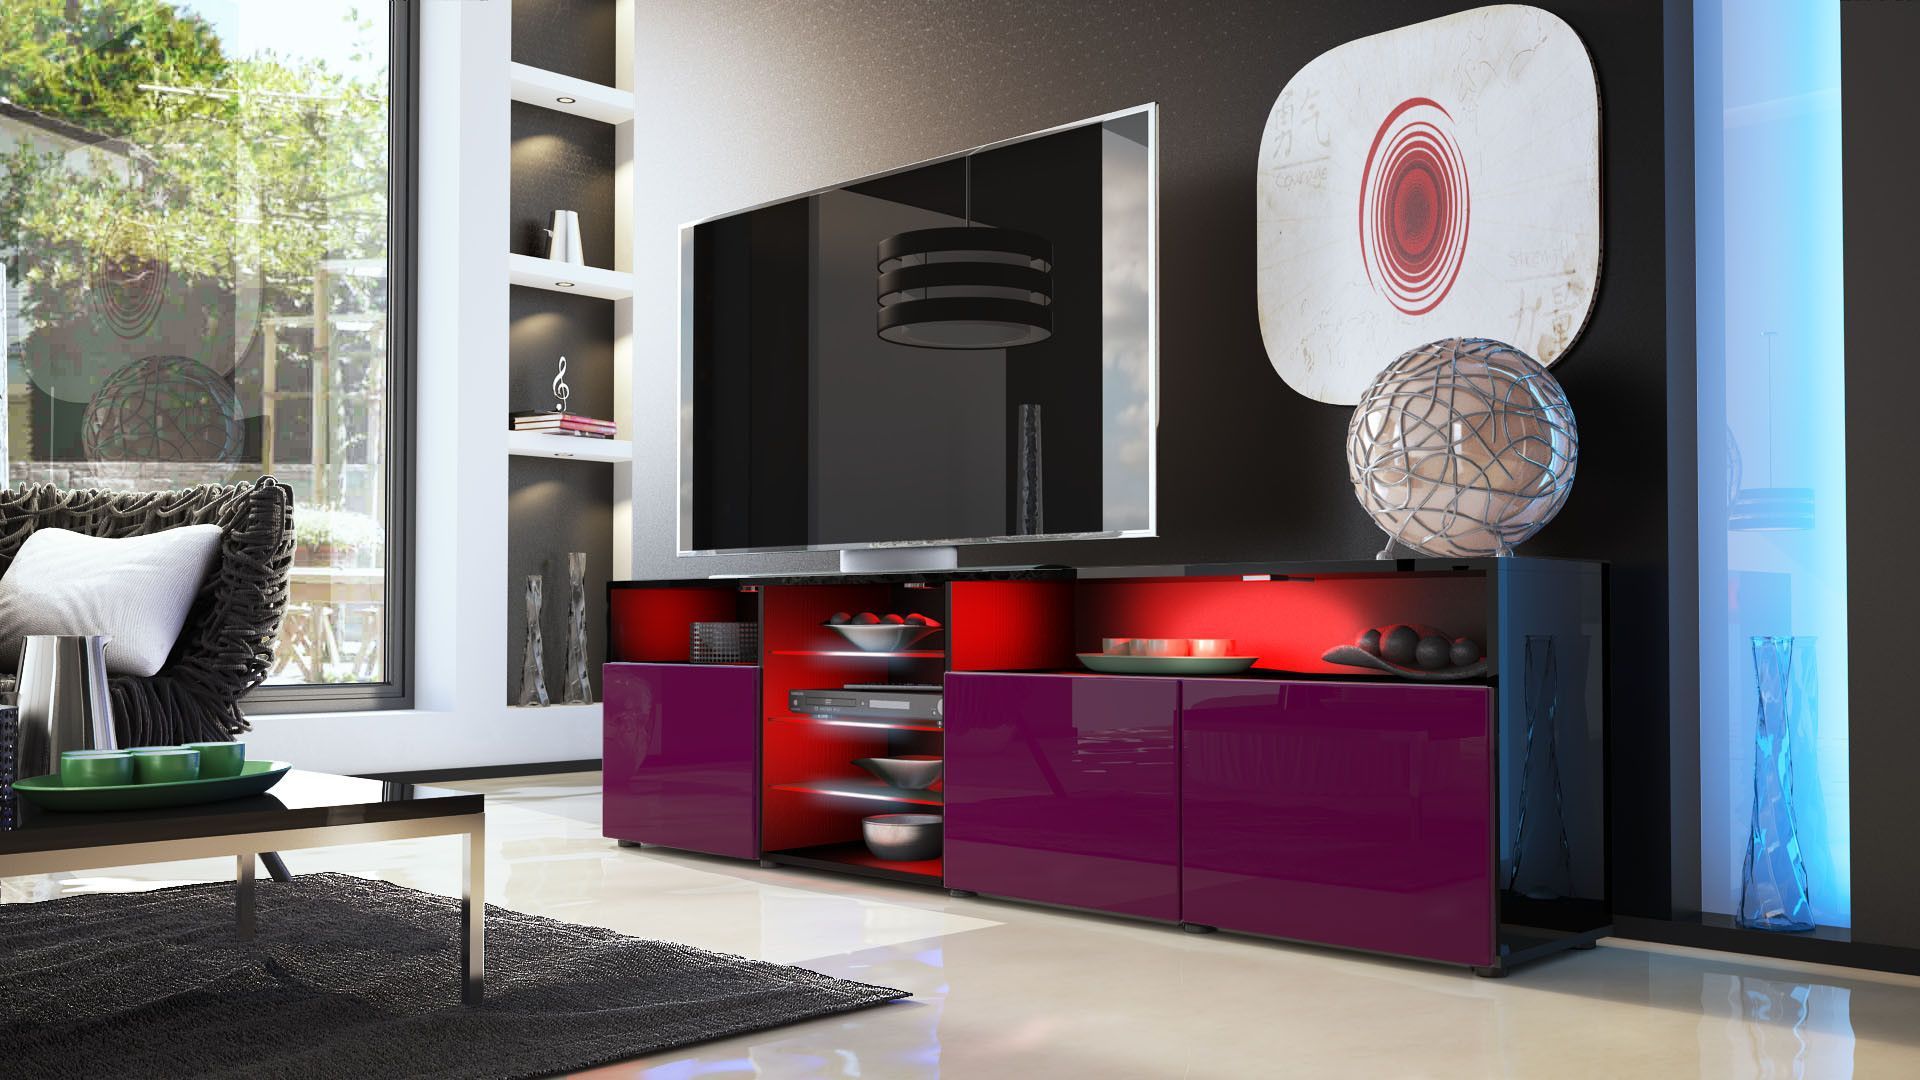 This Unique Modern Tv Stand / Entertainment Unit Is Sure Throughout Unusual Tv Stands (View 13 of 15)